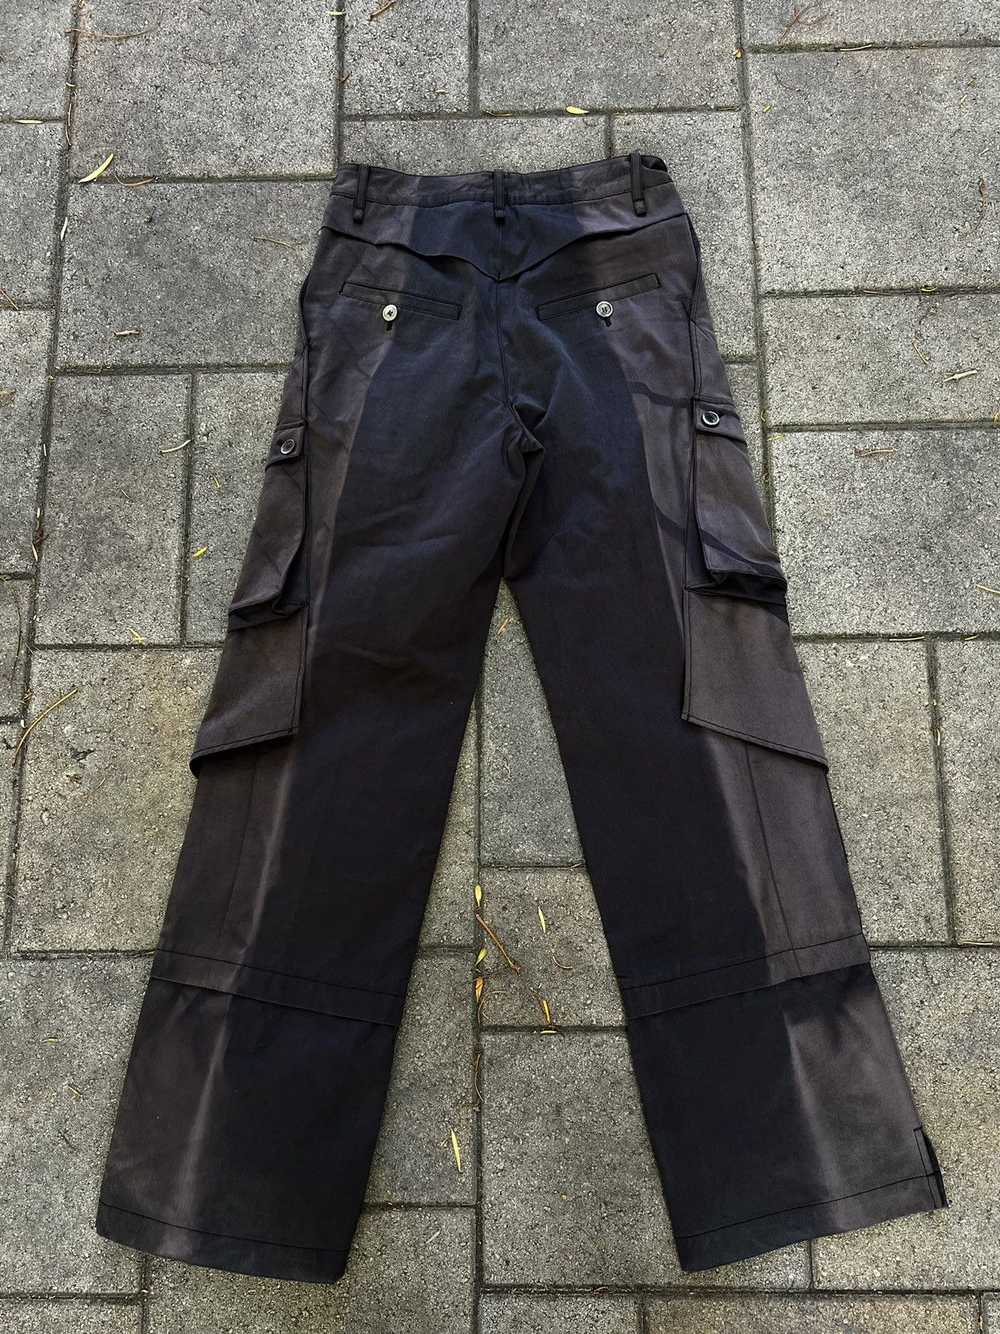 JiyongKim 2022 Sun-faded Barbed Wire Cargo Pants - image 4